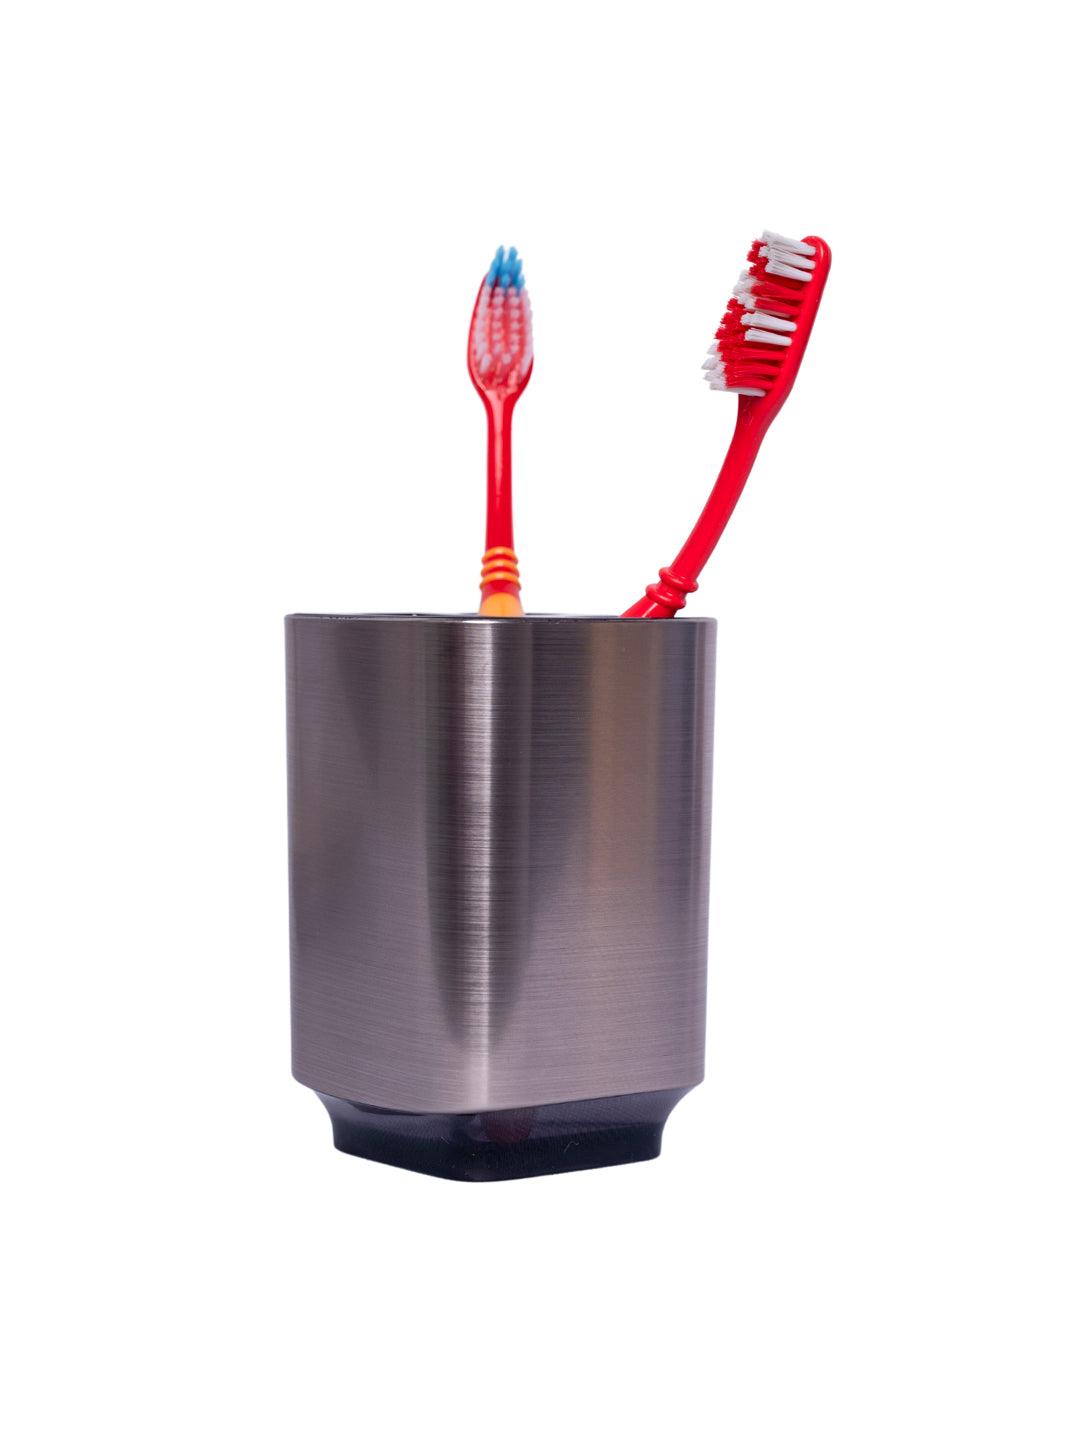 Buy Stylish Tooth Brush Holder - Silver & Black at the best price